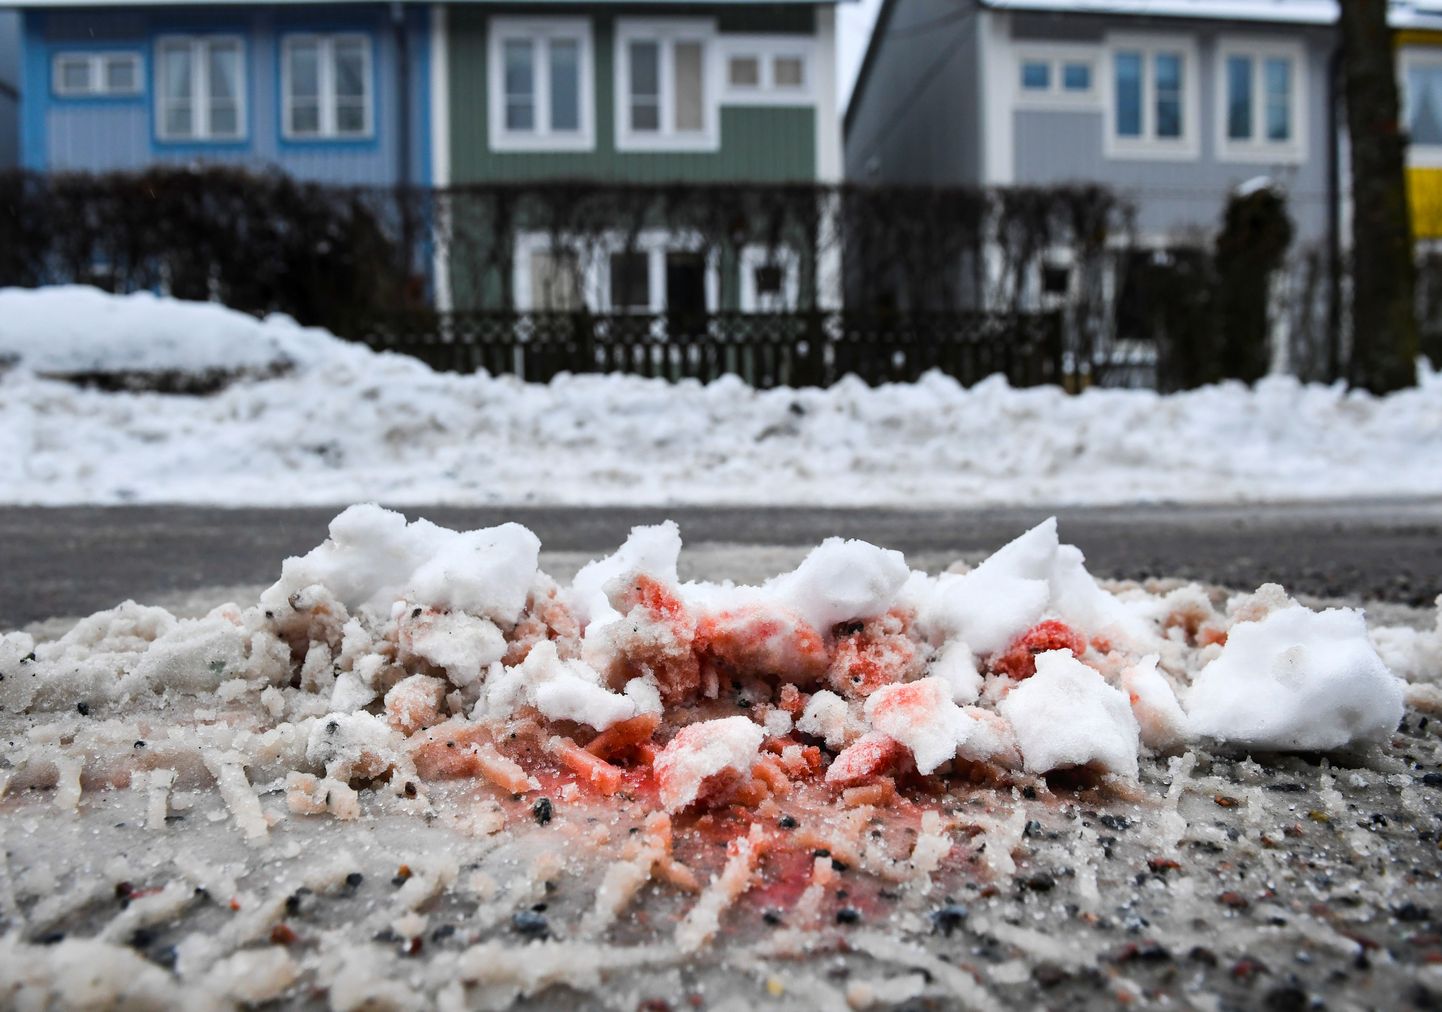 A splash of blood on the street where two men in their 20s were shot dead Wednesday night while sitting in a car in a Stockholm suburb Kista, where feuds between criminal gangs fighting over territory have taken place, police officials said, in Stockholm, Sweden, Thursday March 9, 2017. TT NEWS AGENCY/Pontus Lundahl via REUTERS    ATTENTION EDITORS - THIS IMAGE WAS PROVIDED BY A THIRD PARTY. FOR EDITORIAL USE ONLY. SWEDEN OUT. NO COMMERCIAL OR EDITORIAL SALES IN SWEDEN